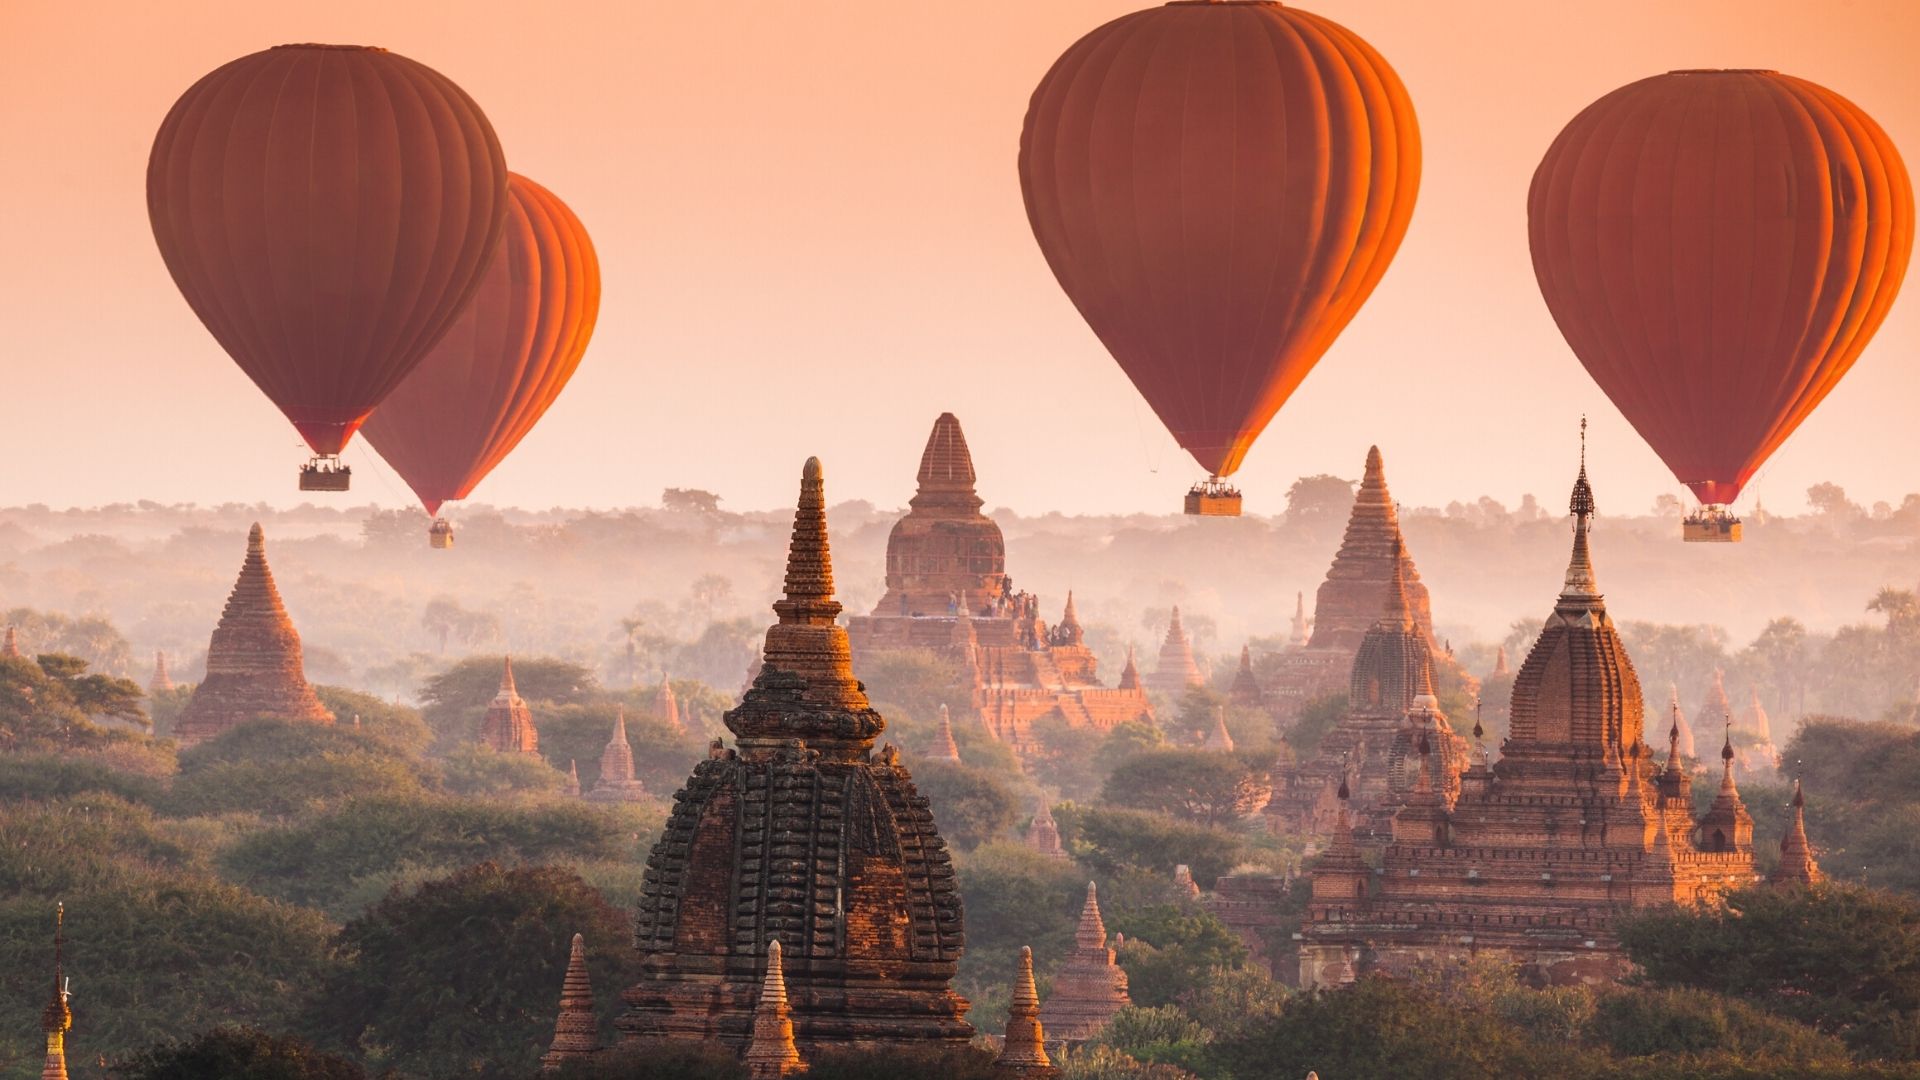 A photograph of Asia, lined with hot air balloons